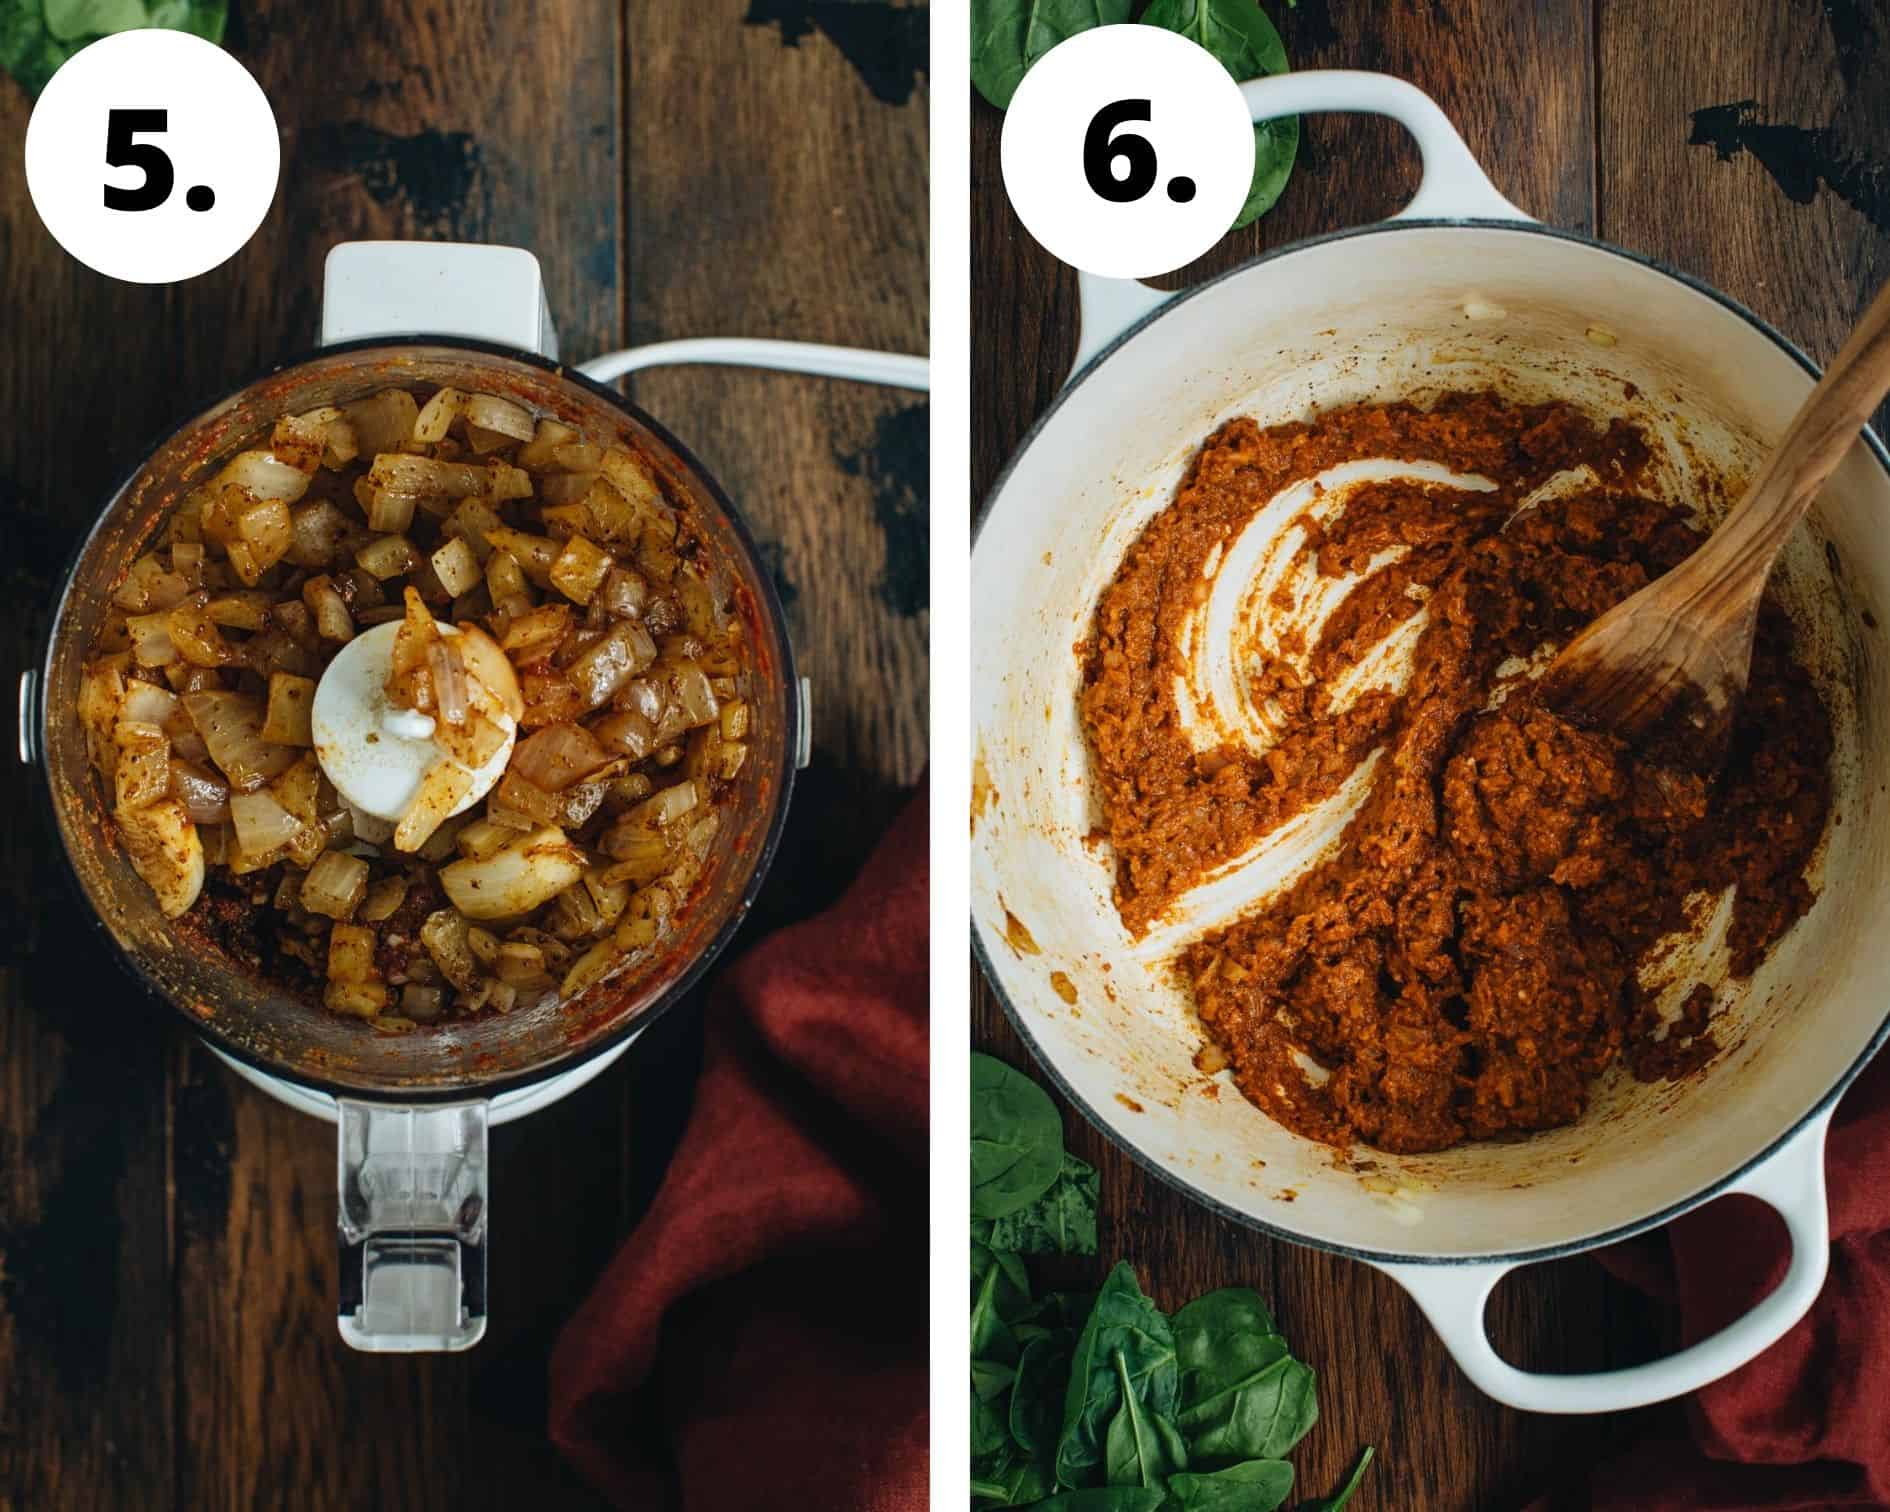 Chickpea curry process steps 5 and 6.